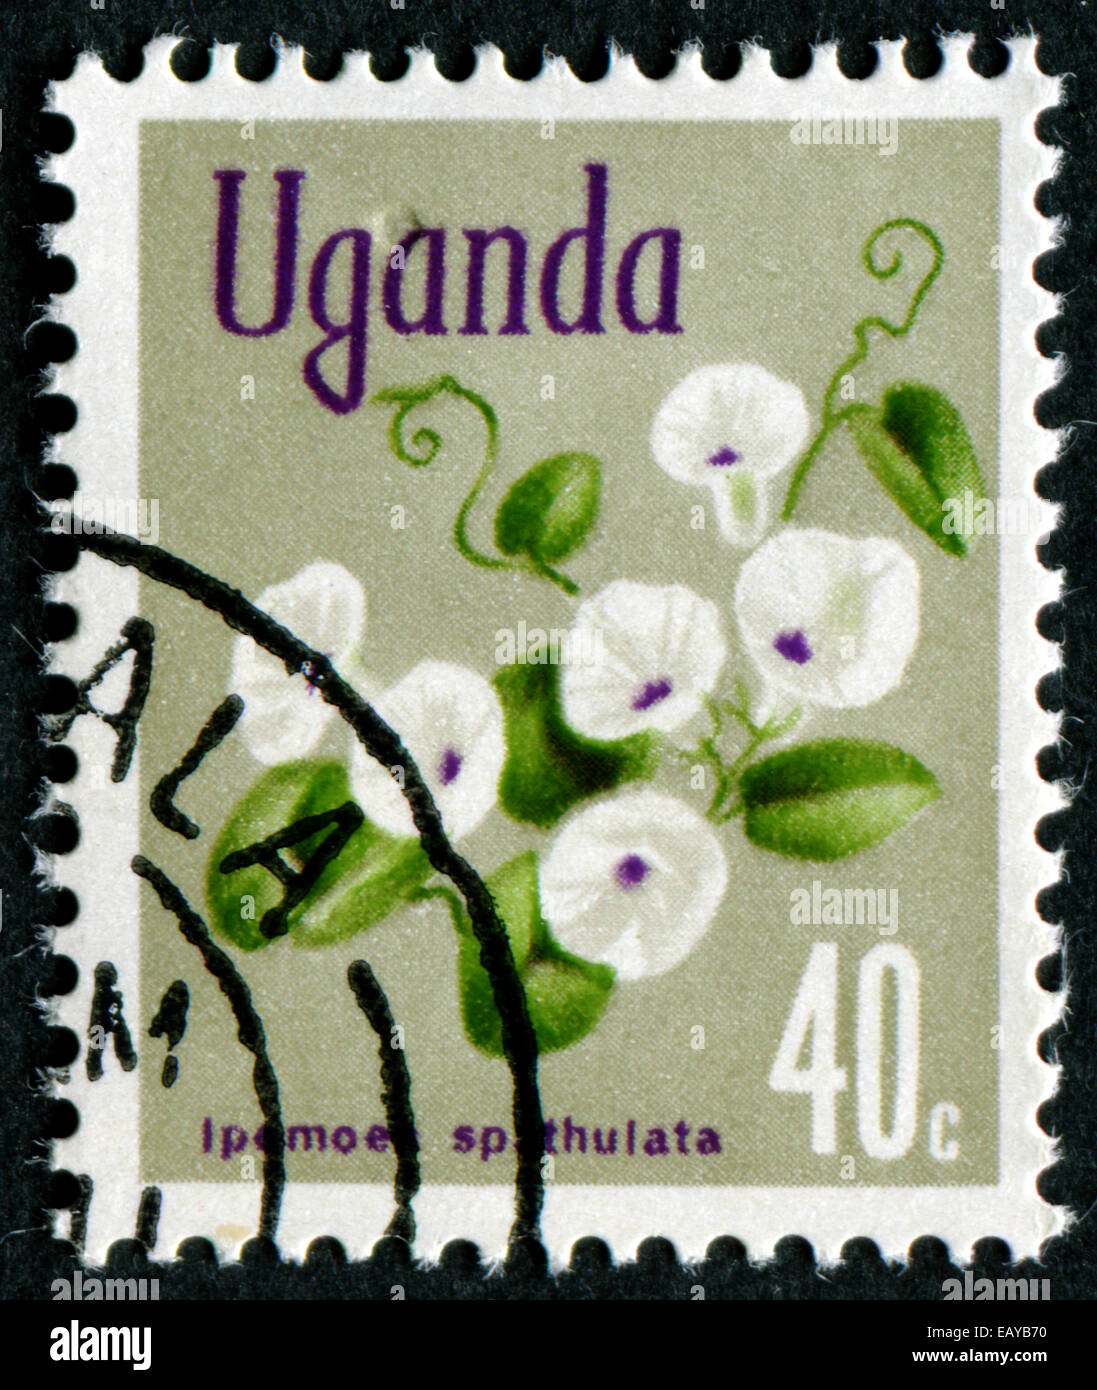 UGANDA - CIRCA 1969: A stamp printed in Uganda shows Ipomoea spathulata Flower, with the same inscription, from the series 'Flow Stock Photo